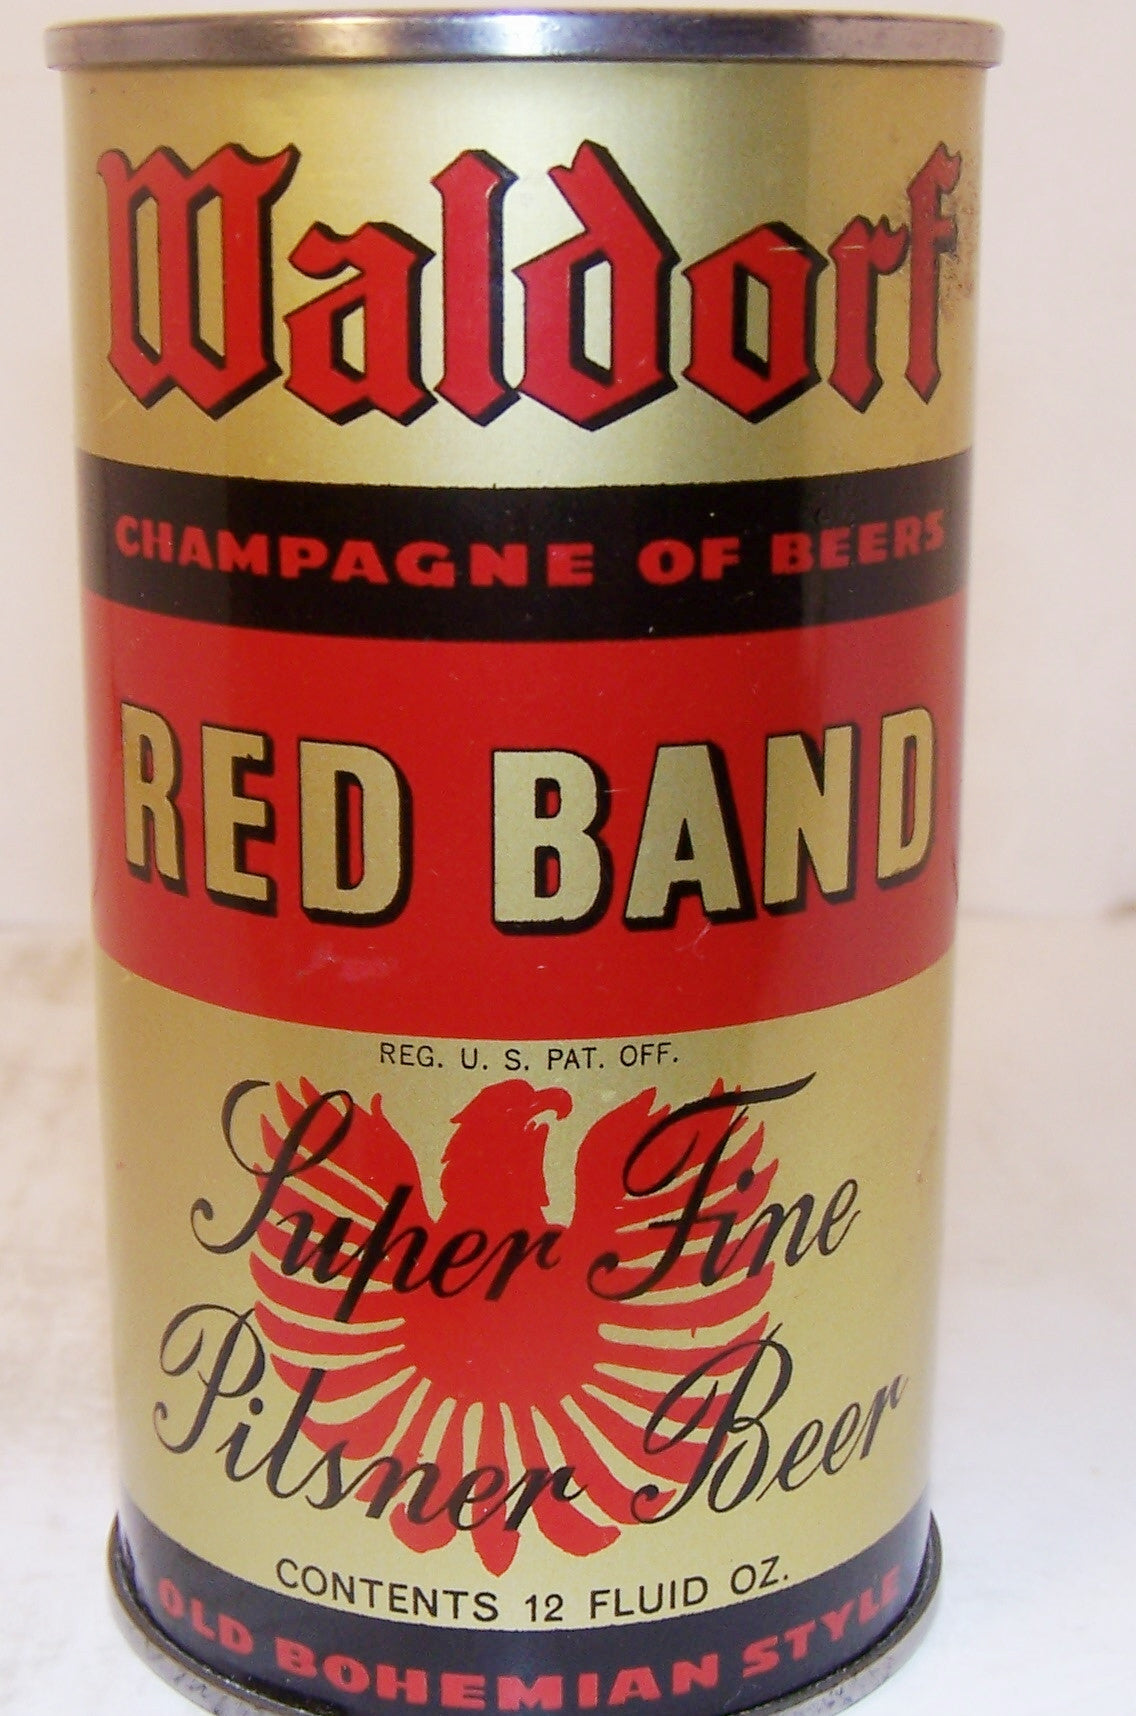 Waldorf Red Band Beer, Lilek page # 859, Grade 1 Sold 2/13/15